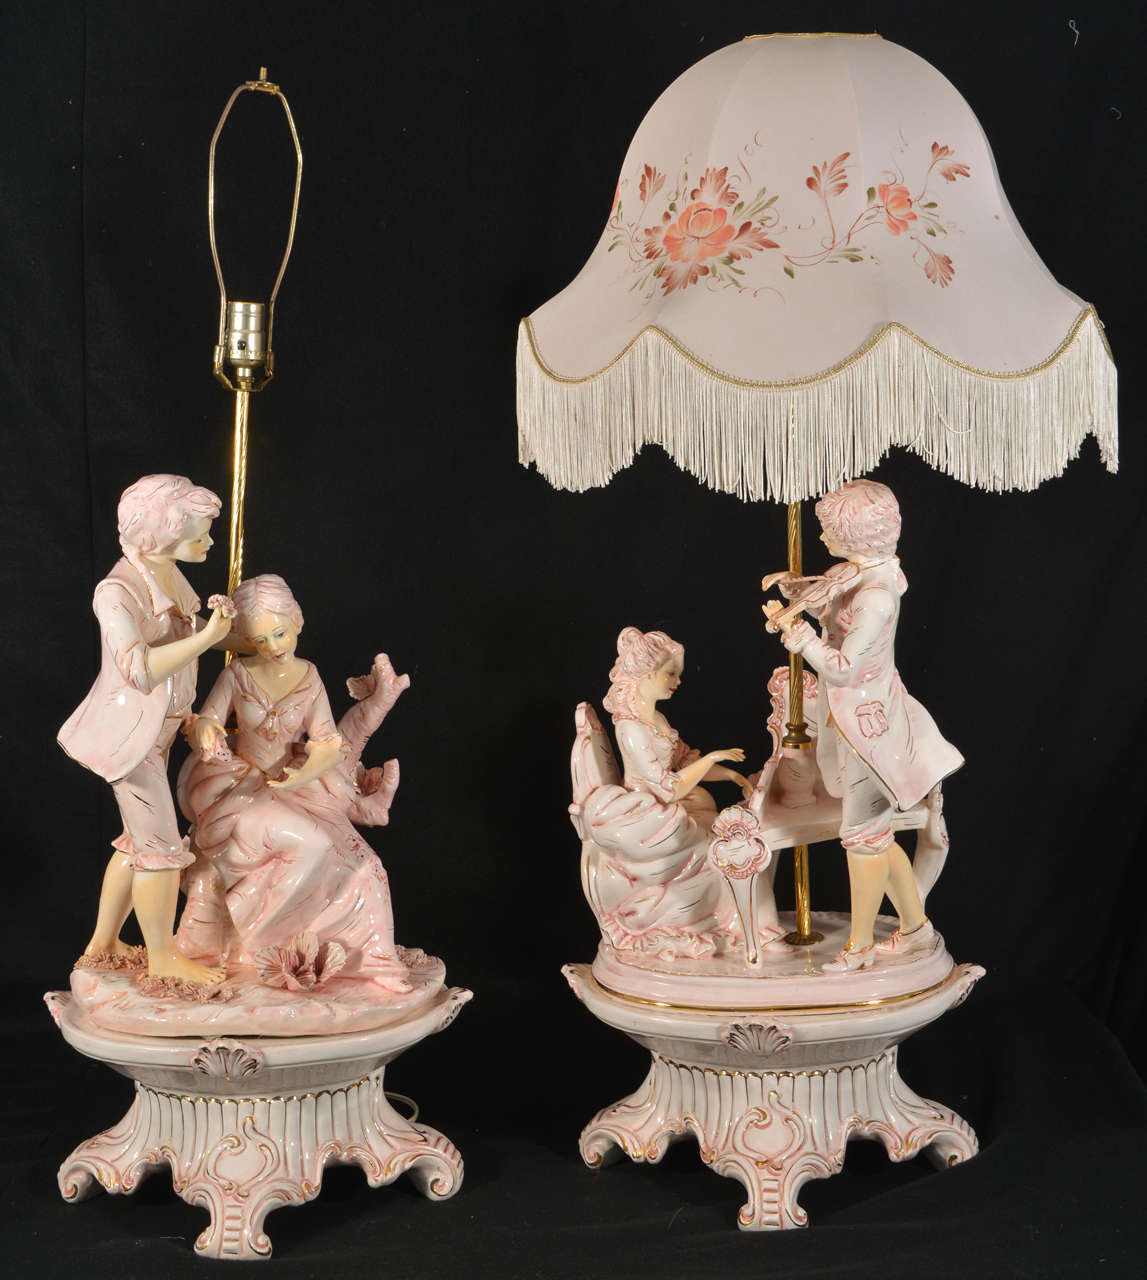 1950's Capi-de-monte Figural Table Lamps with hand painted matching lamp shades.